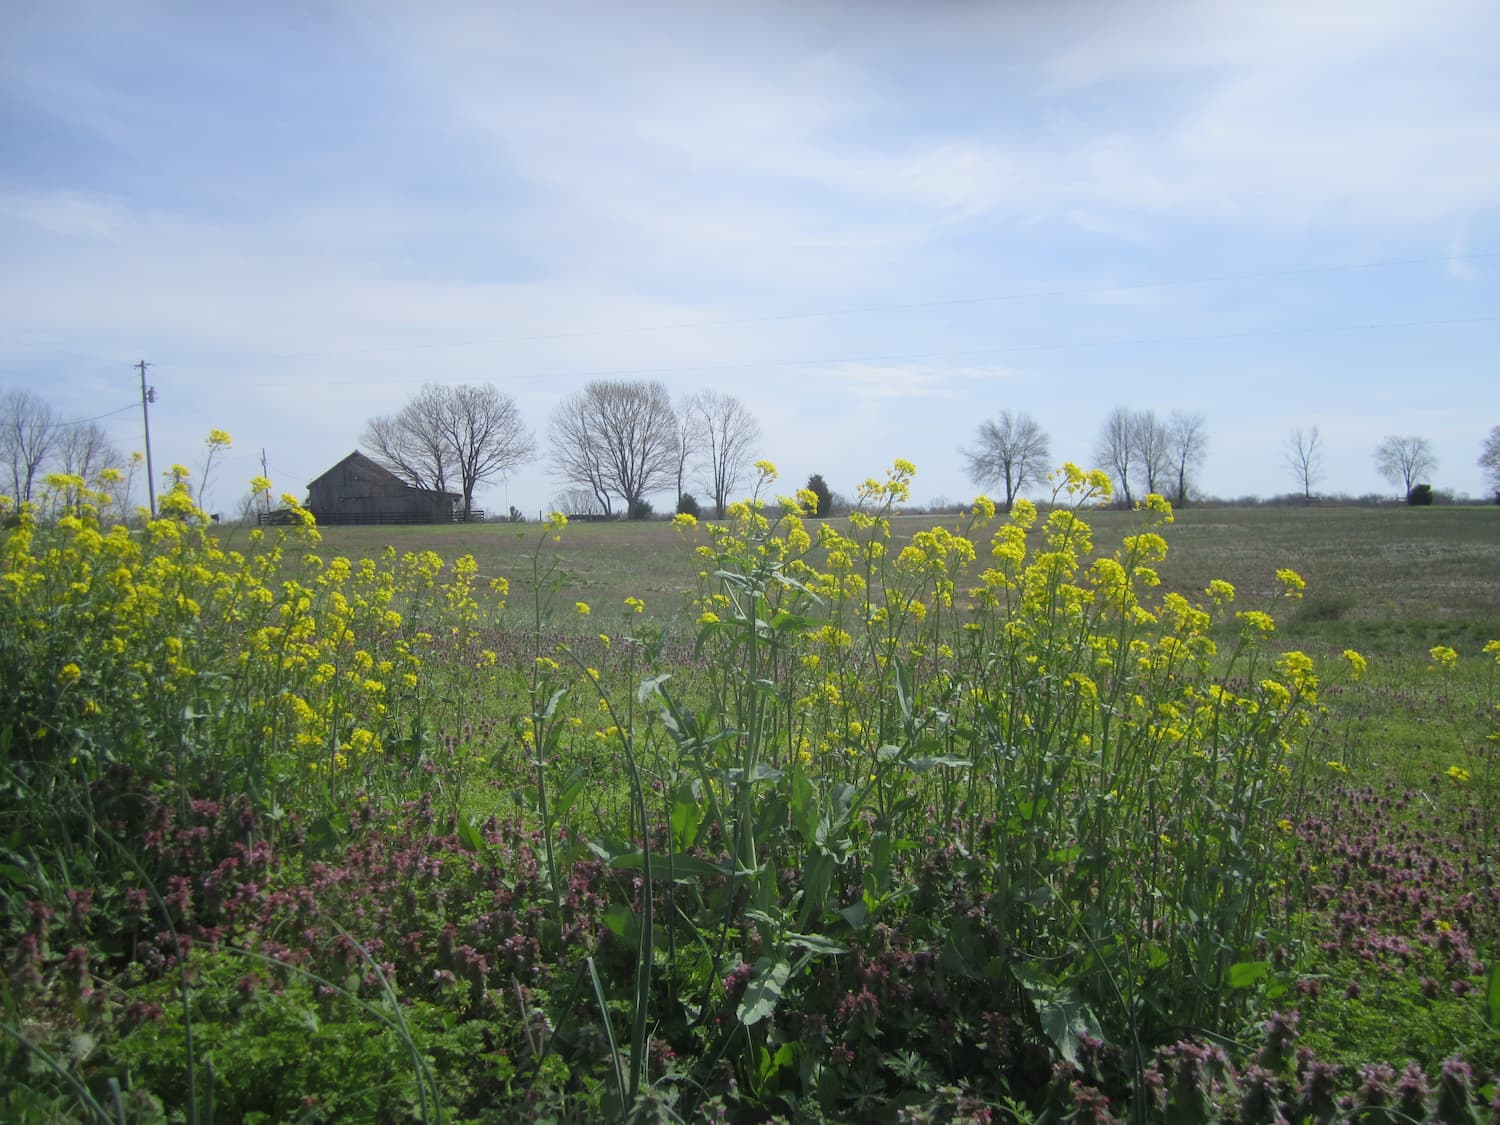 Wild mustard is a common sight along the edges of agricultural fields in the spring.